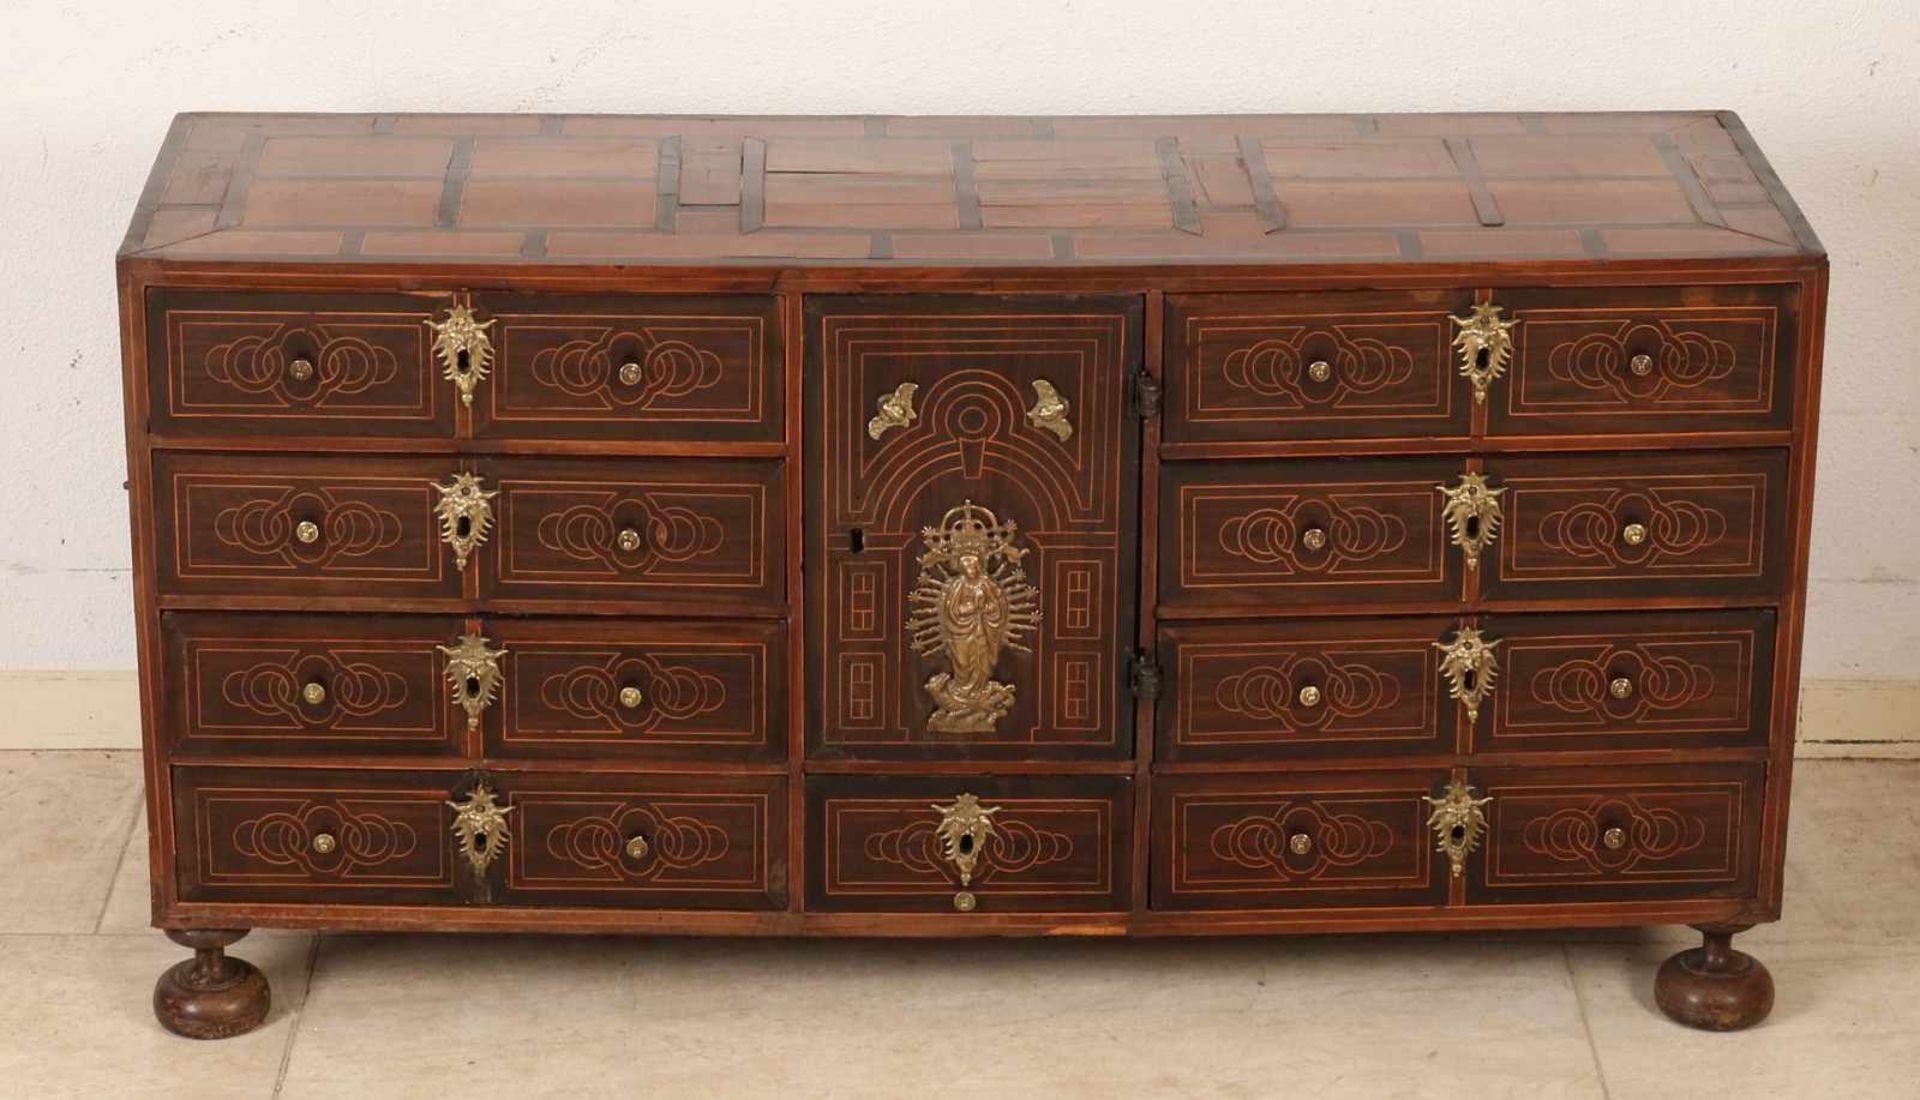 Rare Spanish / Italian? Renaissance Travel cabinet with many drawers behind the door. "Cabinet de